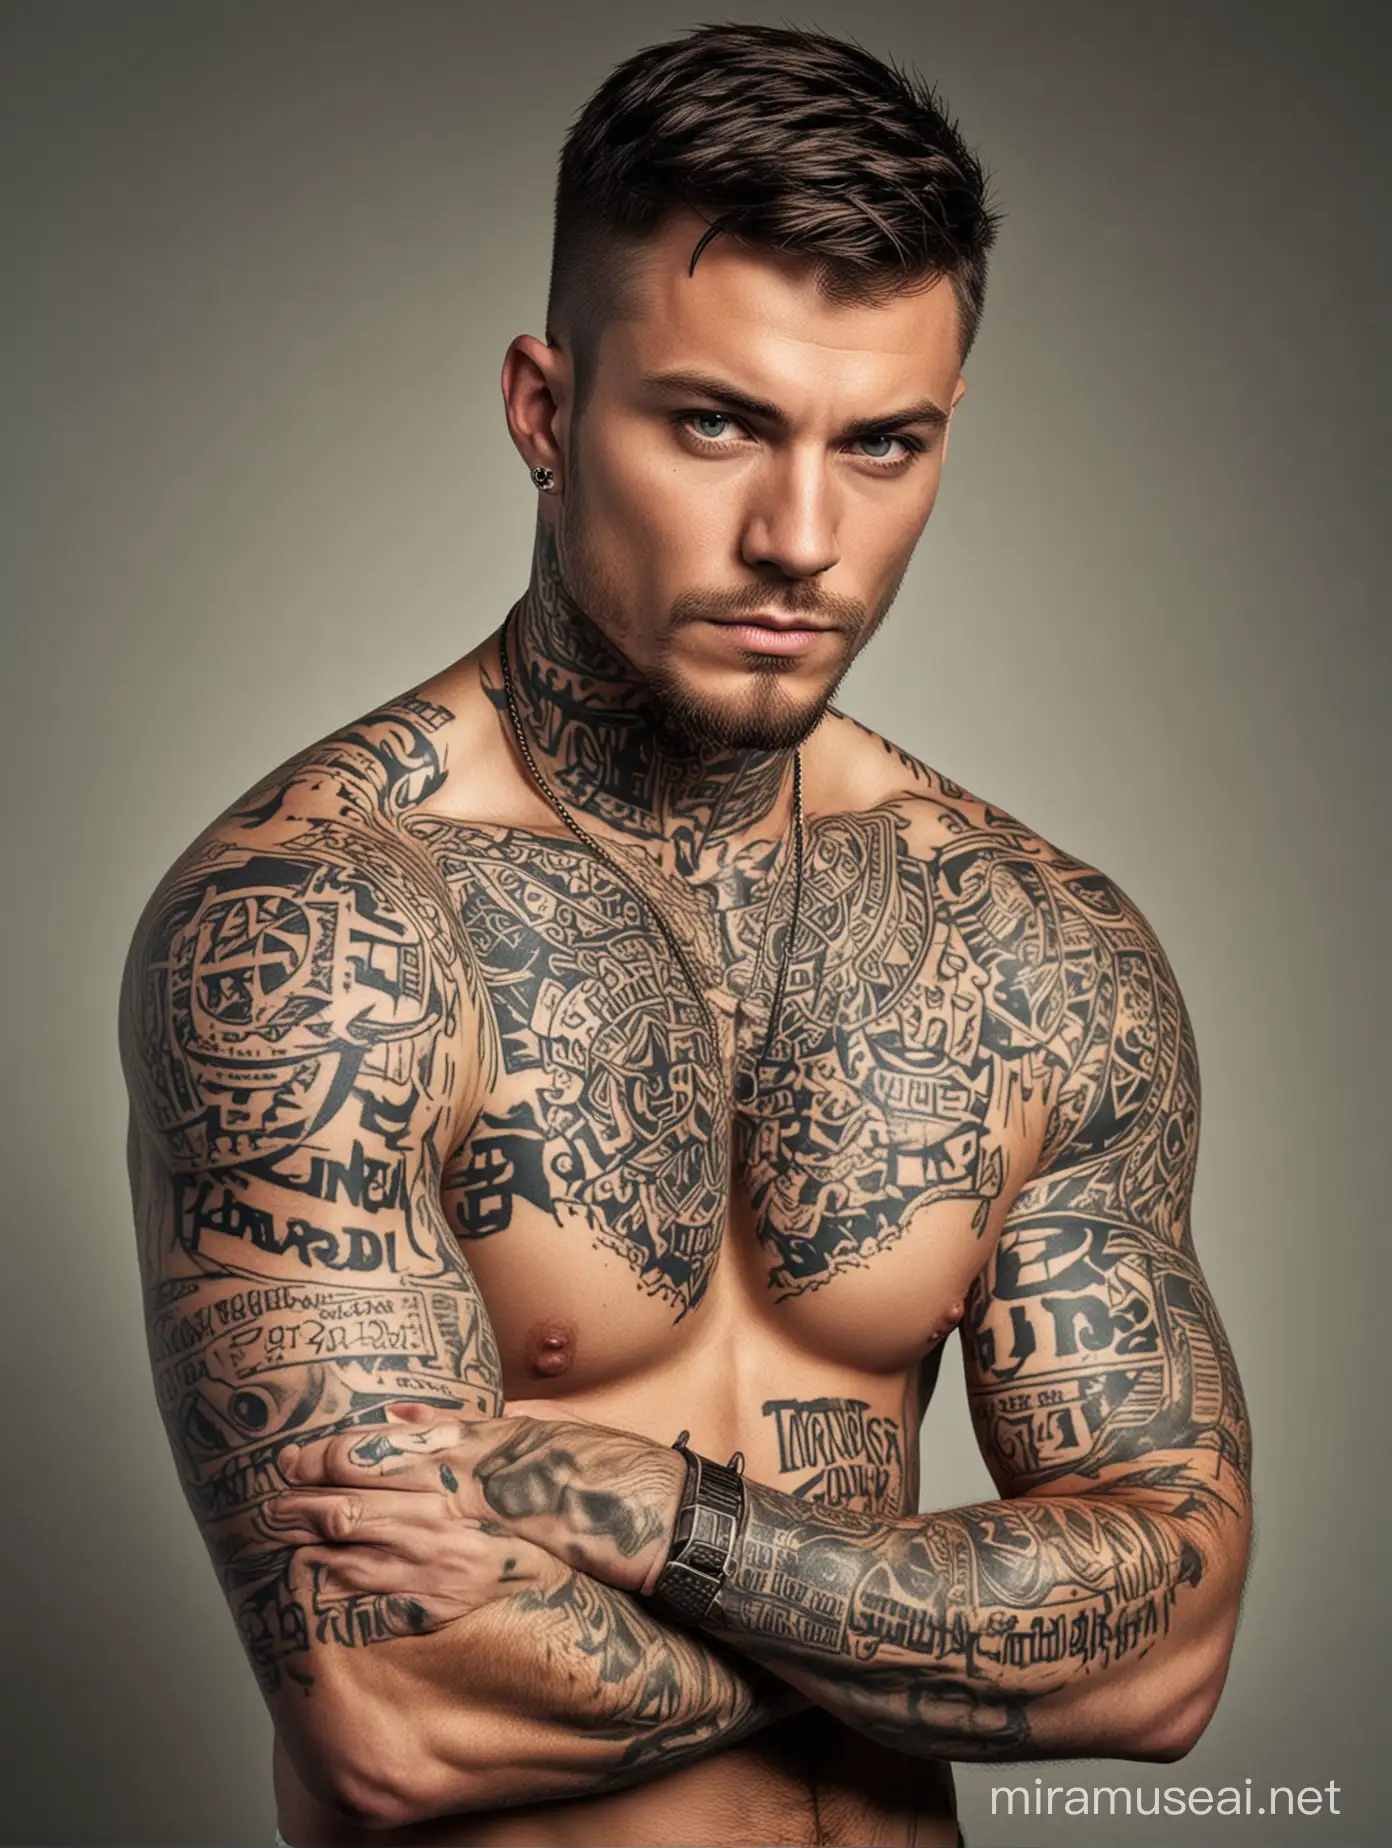 Dominant Tattooed Criminal Authority in Masculine Display